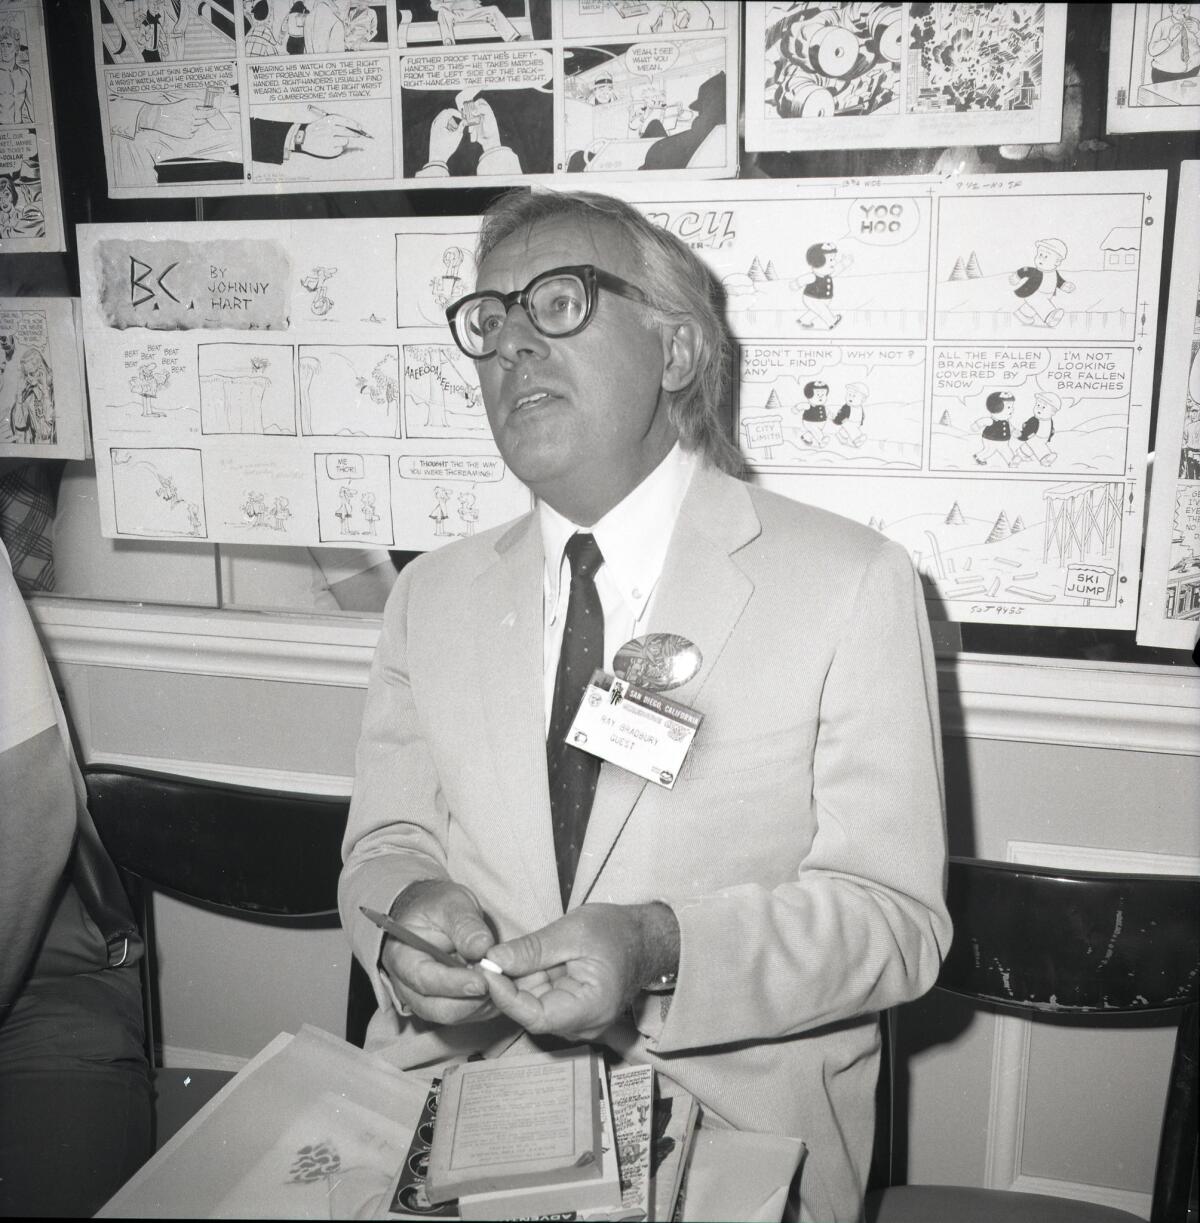 Even author Ray Bradbury bought a few items from the dealers at the San Diego Golden State Comics Convention in the U.S. Grant Hotel on Aug. 1, 1970. "I got a few issues of Mad magazine," he said.